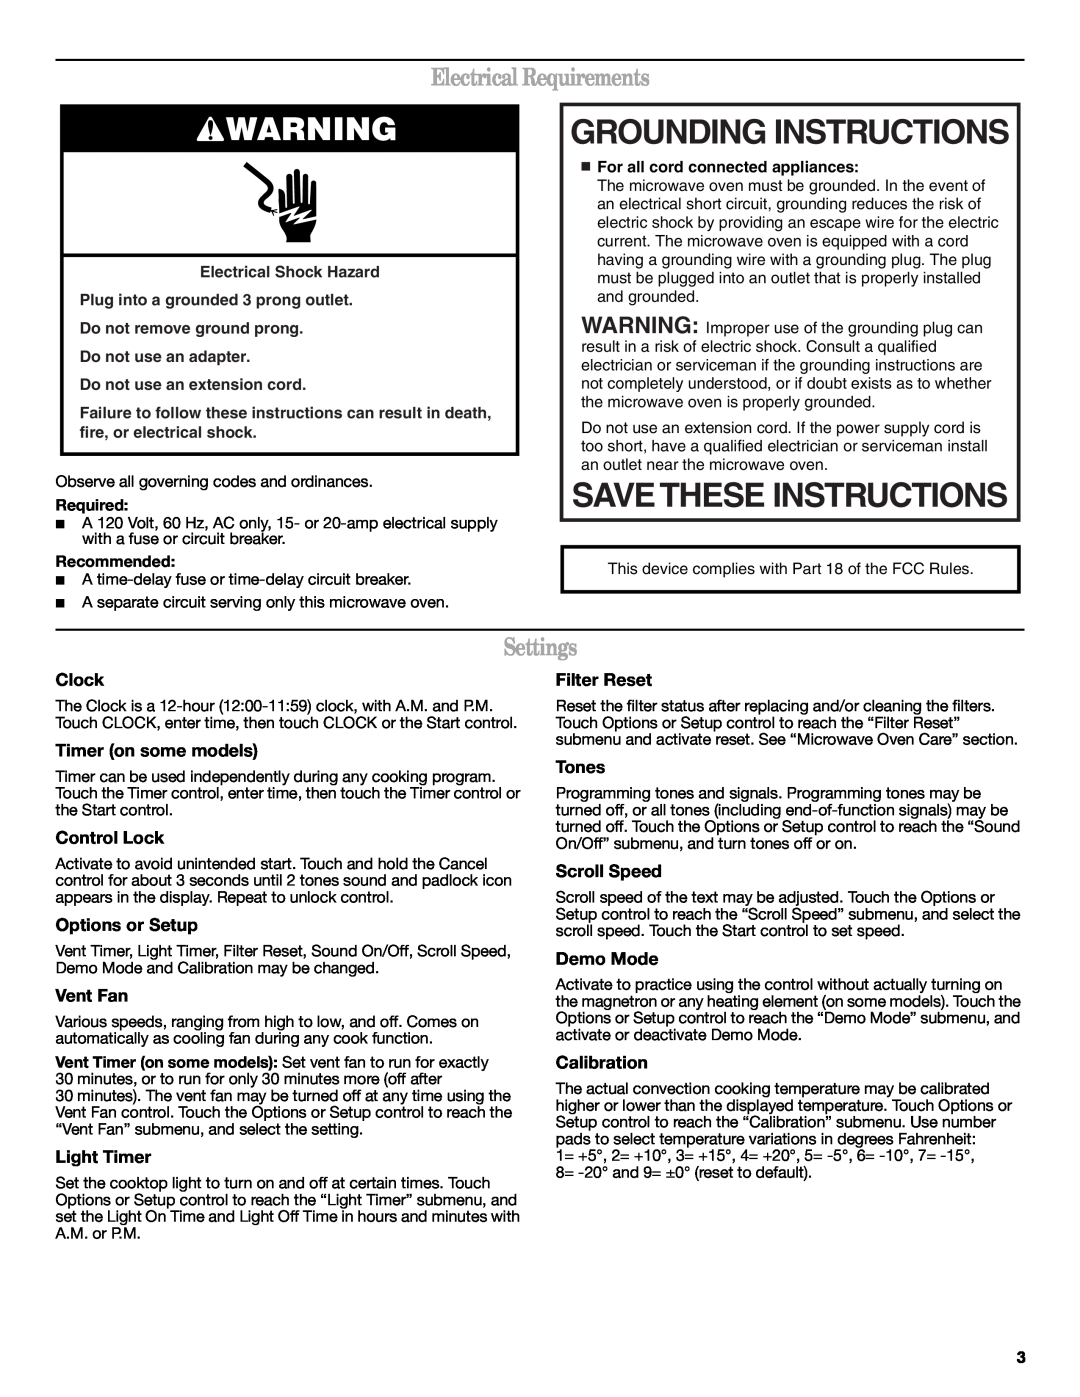 Whirlpool W10249249A Grounding Instructions, Electrical Requirements, Settings, Clock, Timer on some models, Control Lock 